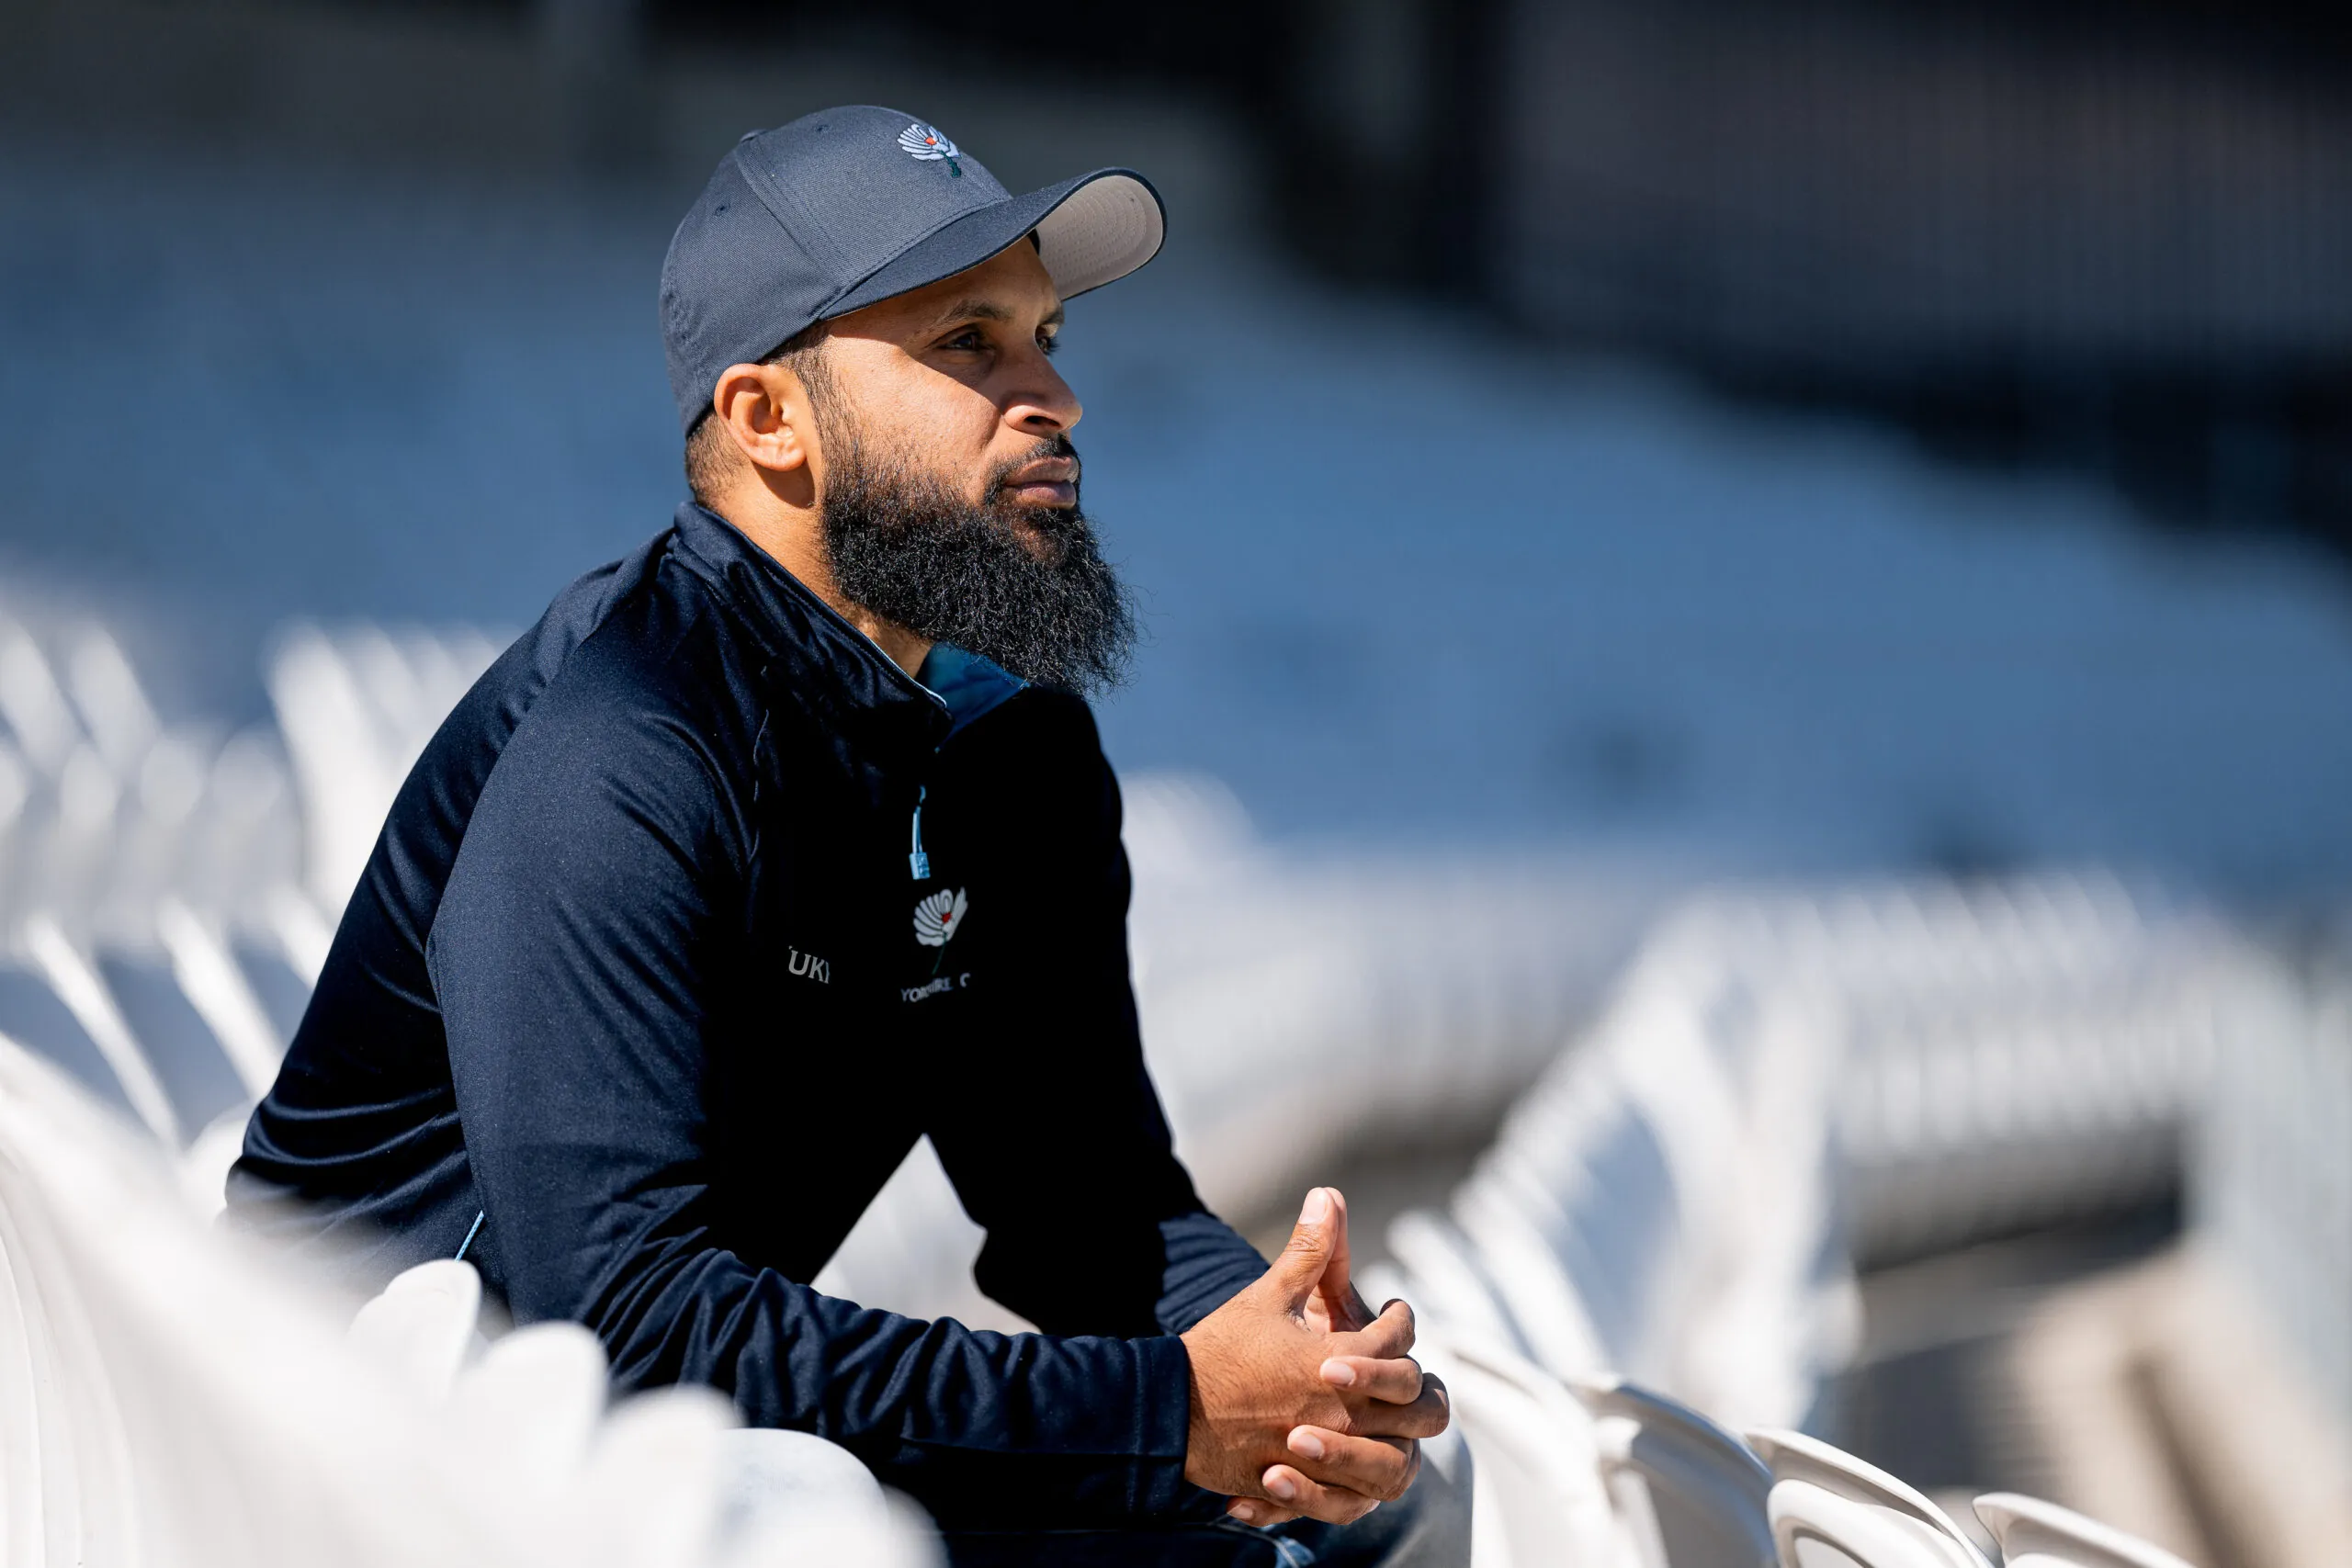 Yorkshire CCC and England cricketer Adil Rashid is pictured at Headingley Stadium as he is set to be named in the King's Birthday Honours list.